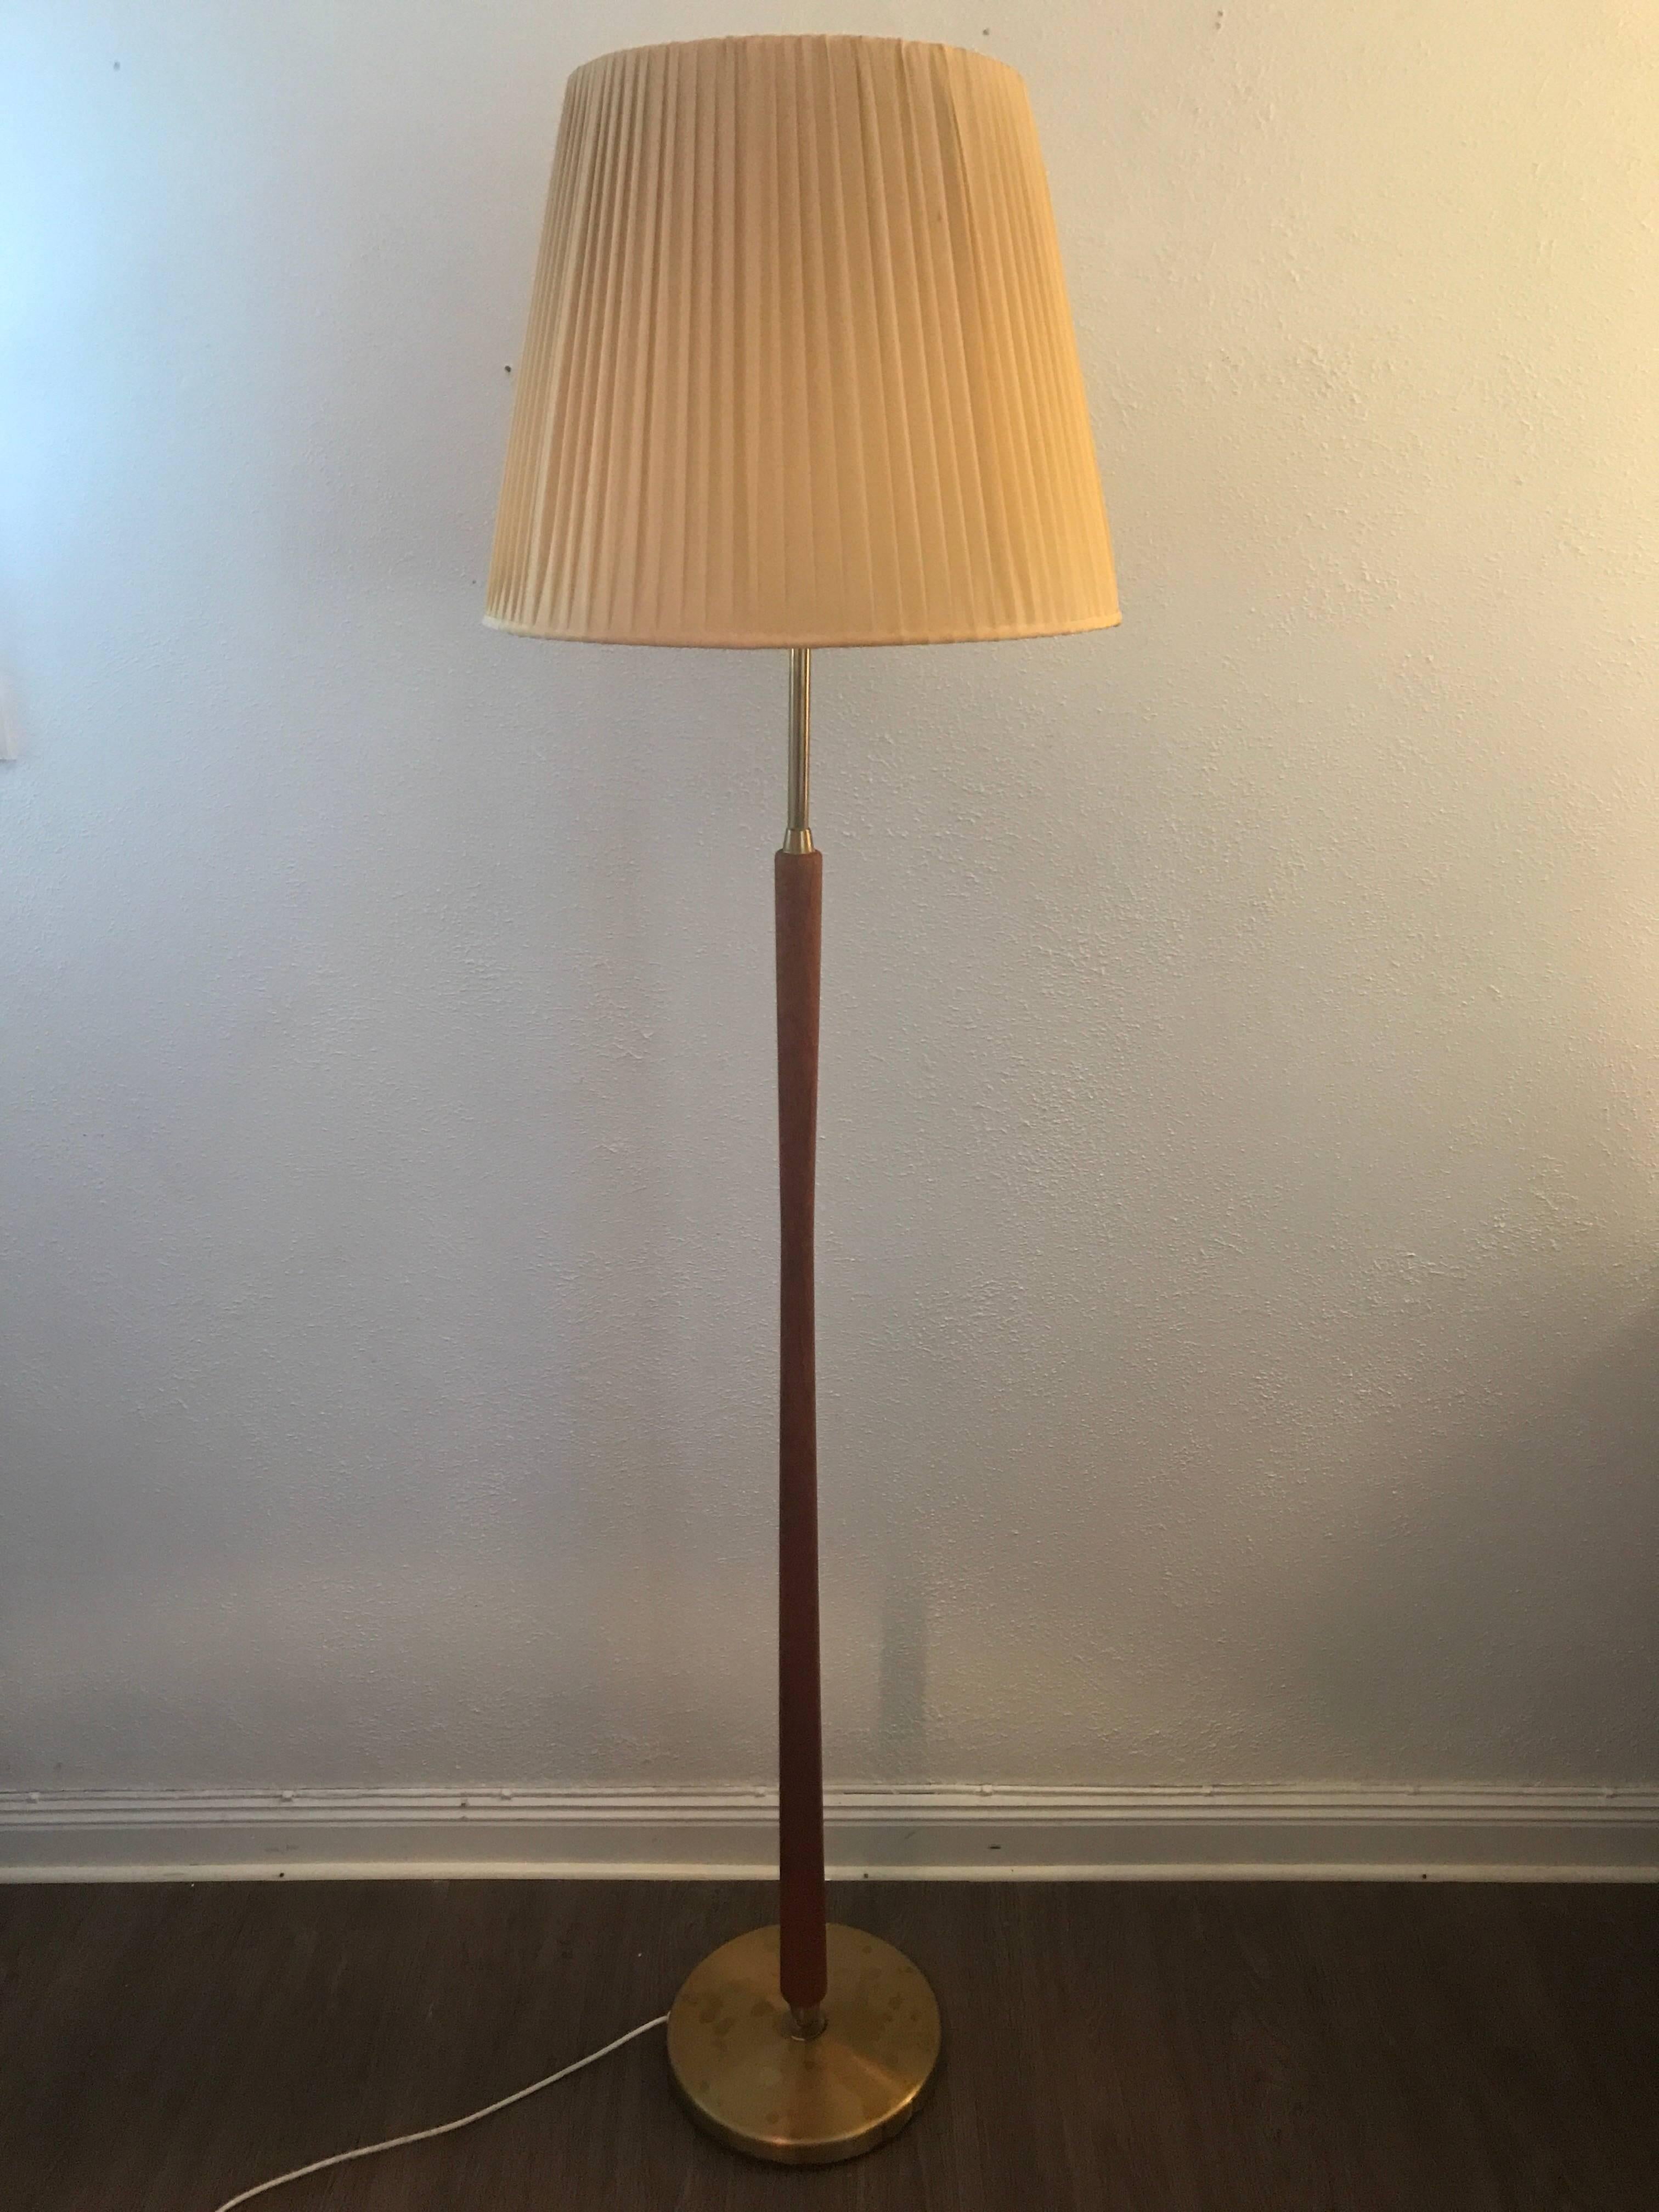 Large Swedish ASEA Up and Downlight Floor Lamp by Hans Bergström For Sale 1